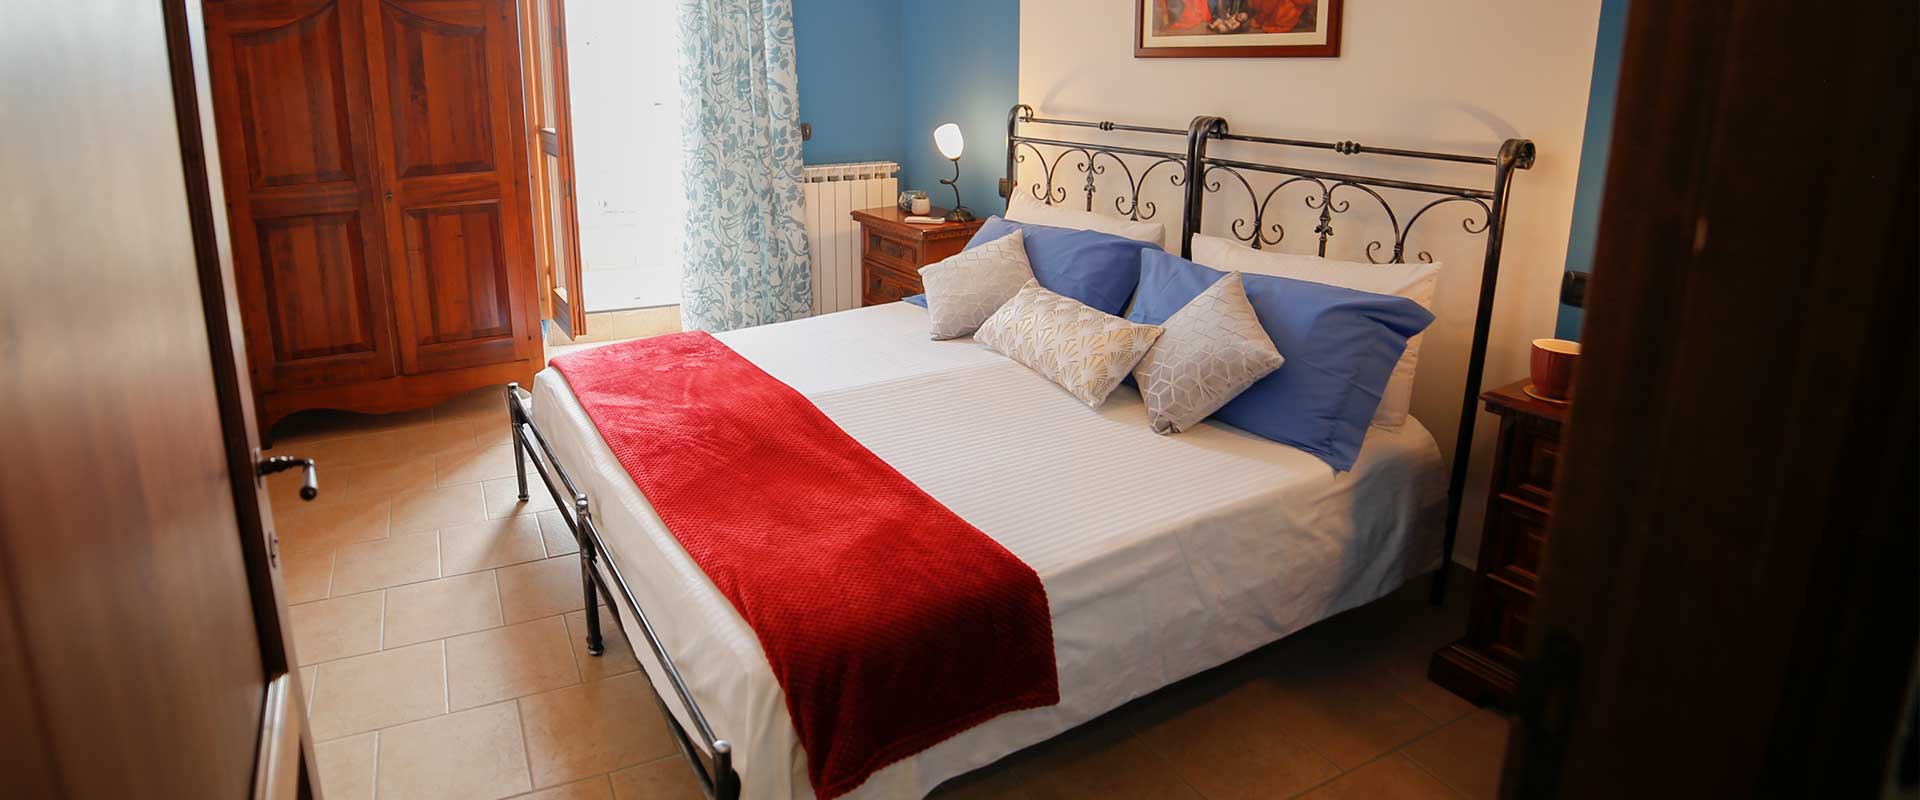 Tersicore is a cozy holiday apartment for 4 people with a small balcony. Le Muse Apartments Bevagna historic center, Umbria, Italy